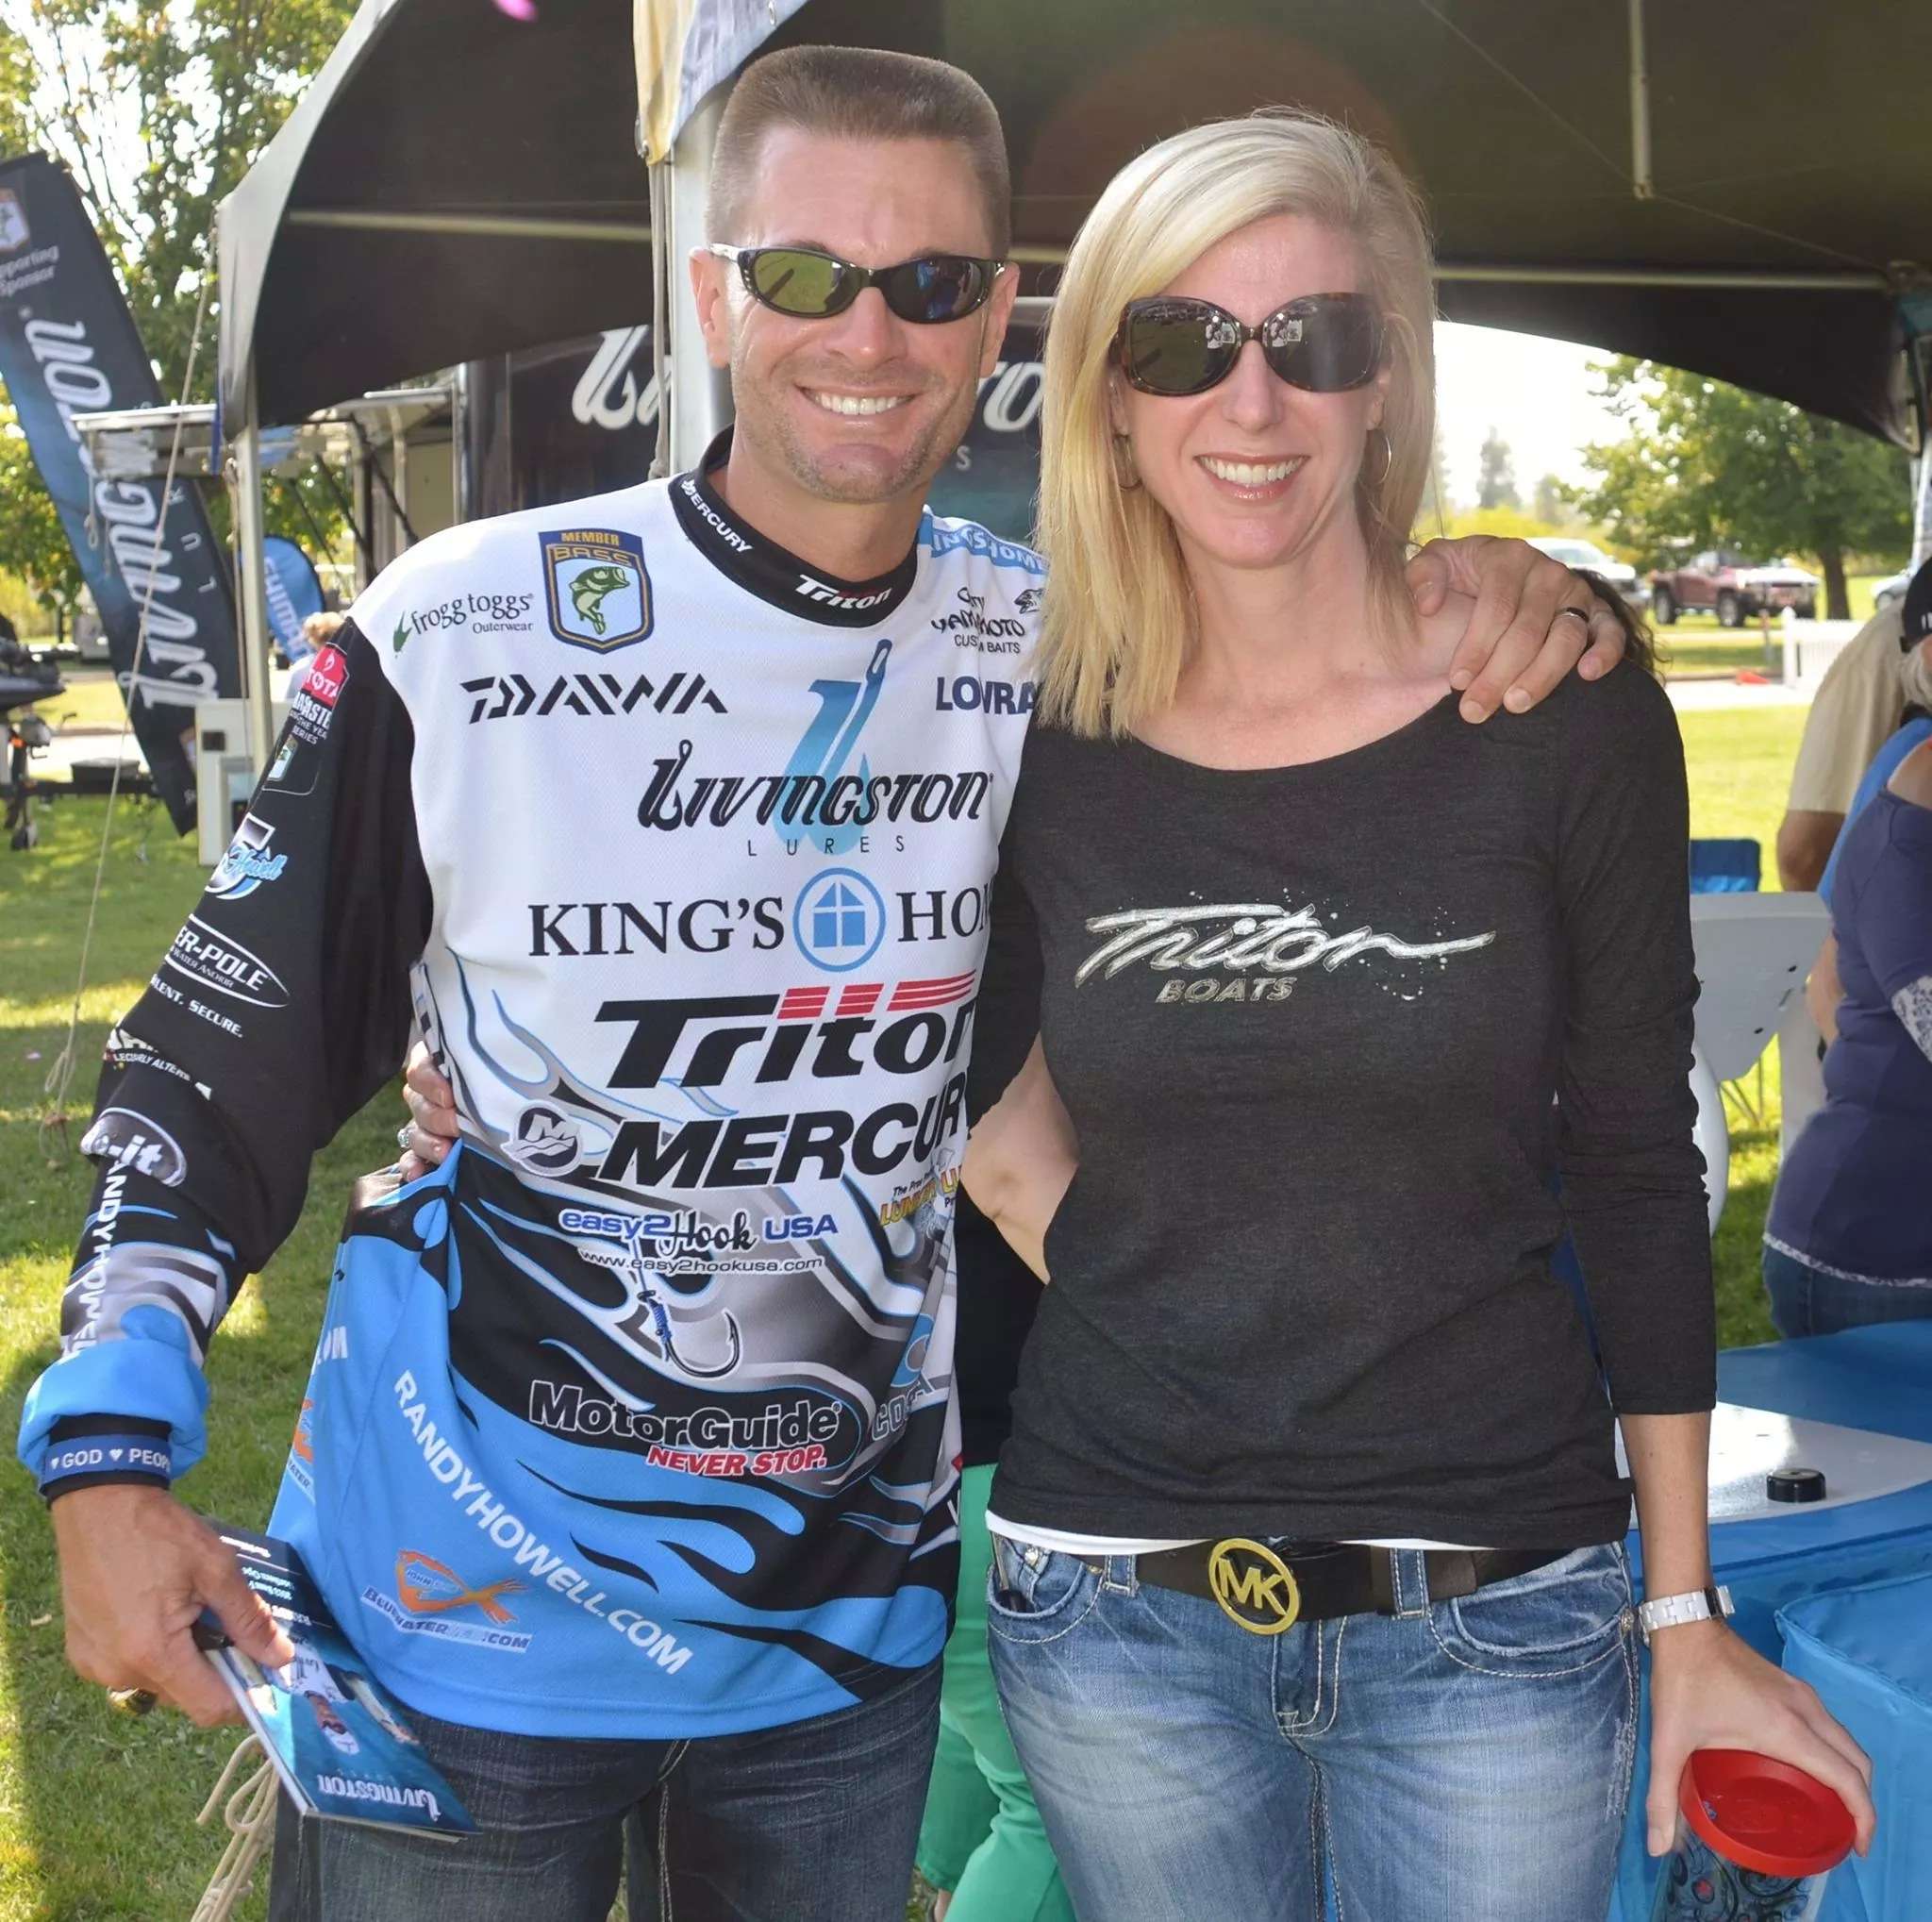 In her latest column, Robin Howell, wife of Elite Series pro Randy Howell, shared stories from each stop on the 2014 Elite Series.